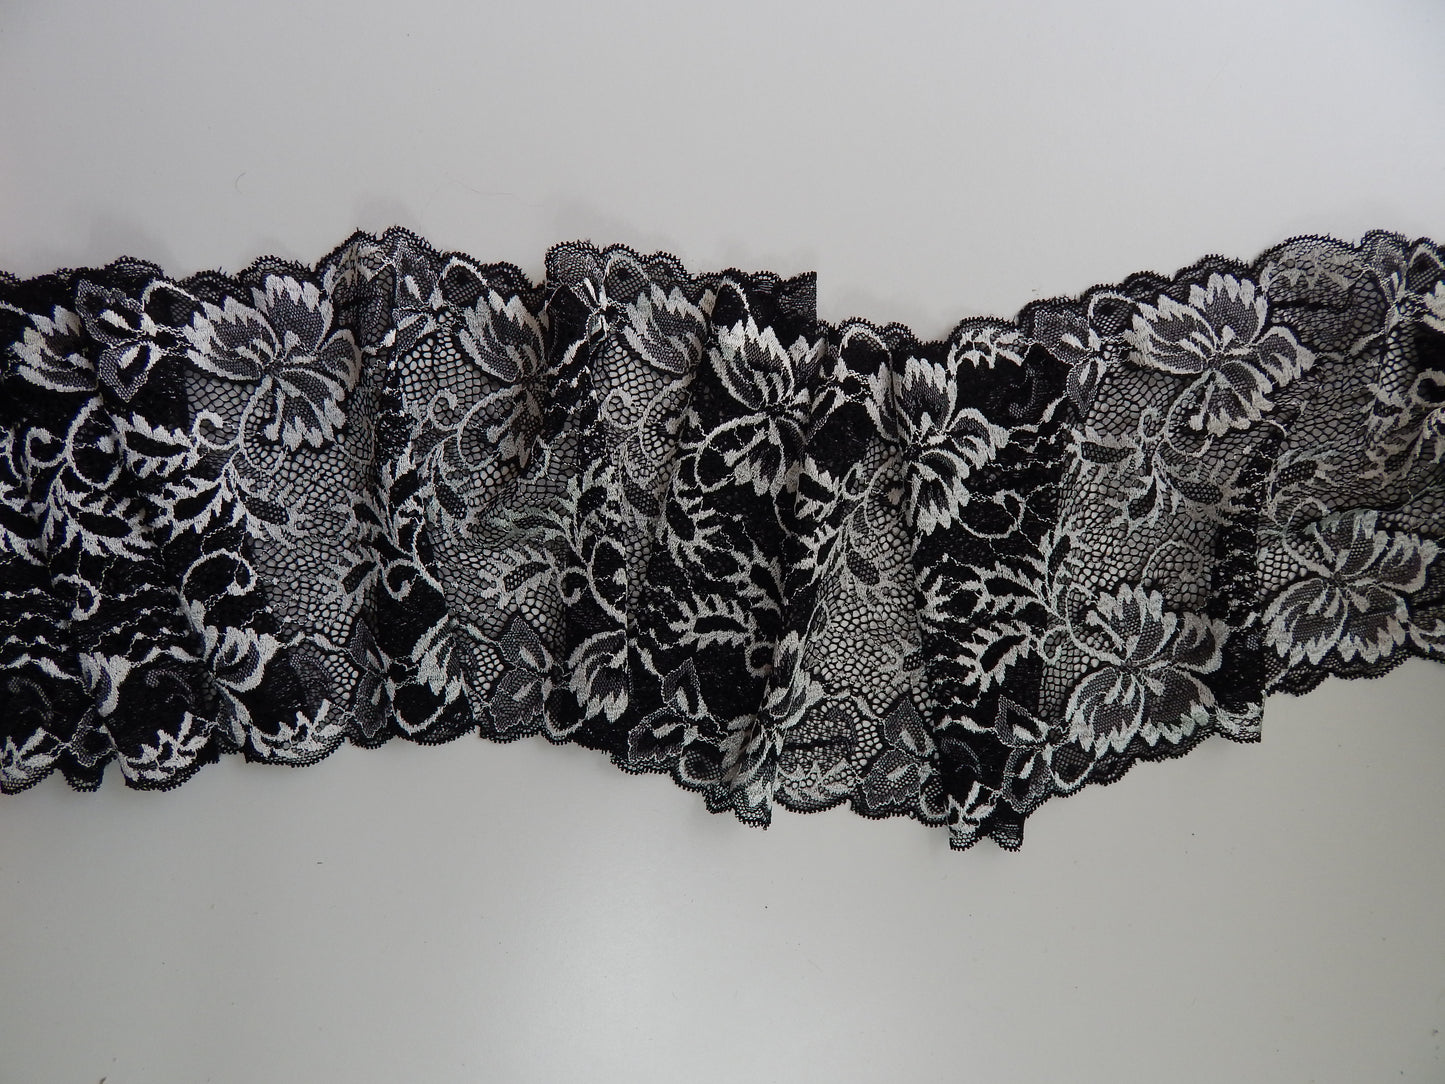 Black and white stretch lace fabric